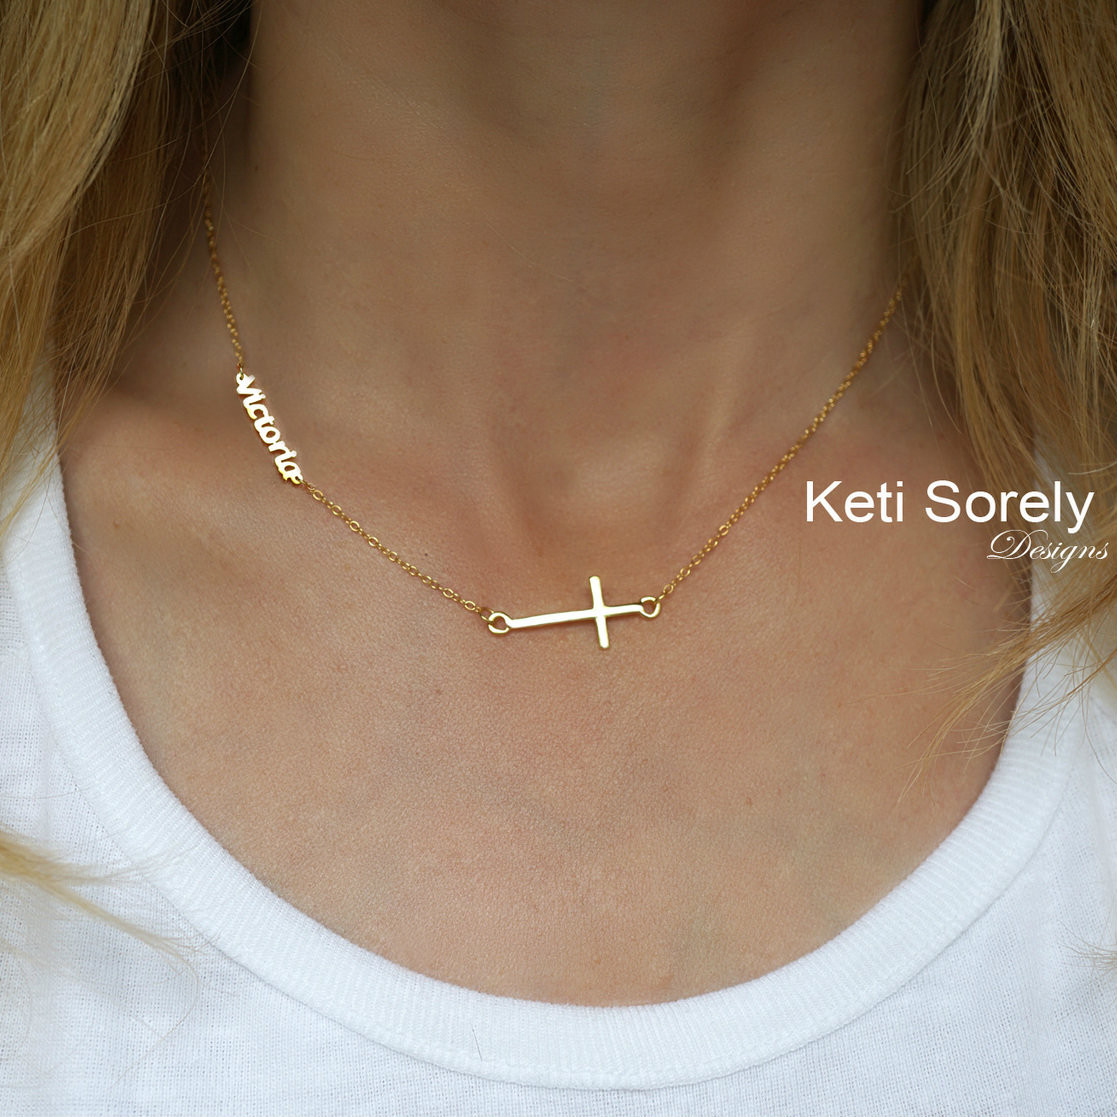 Personalized name necklace with sideways cross in Sterling Silver